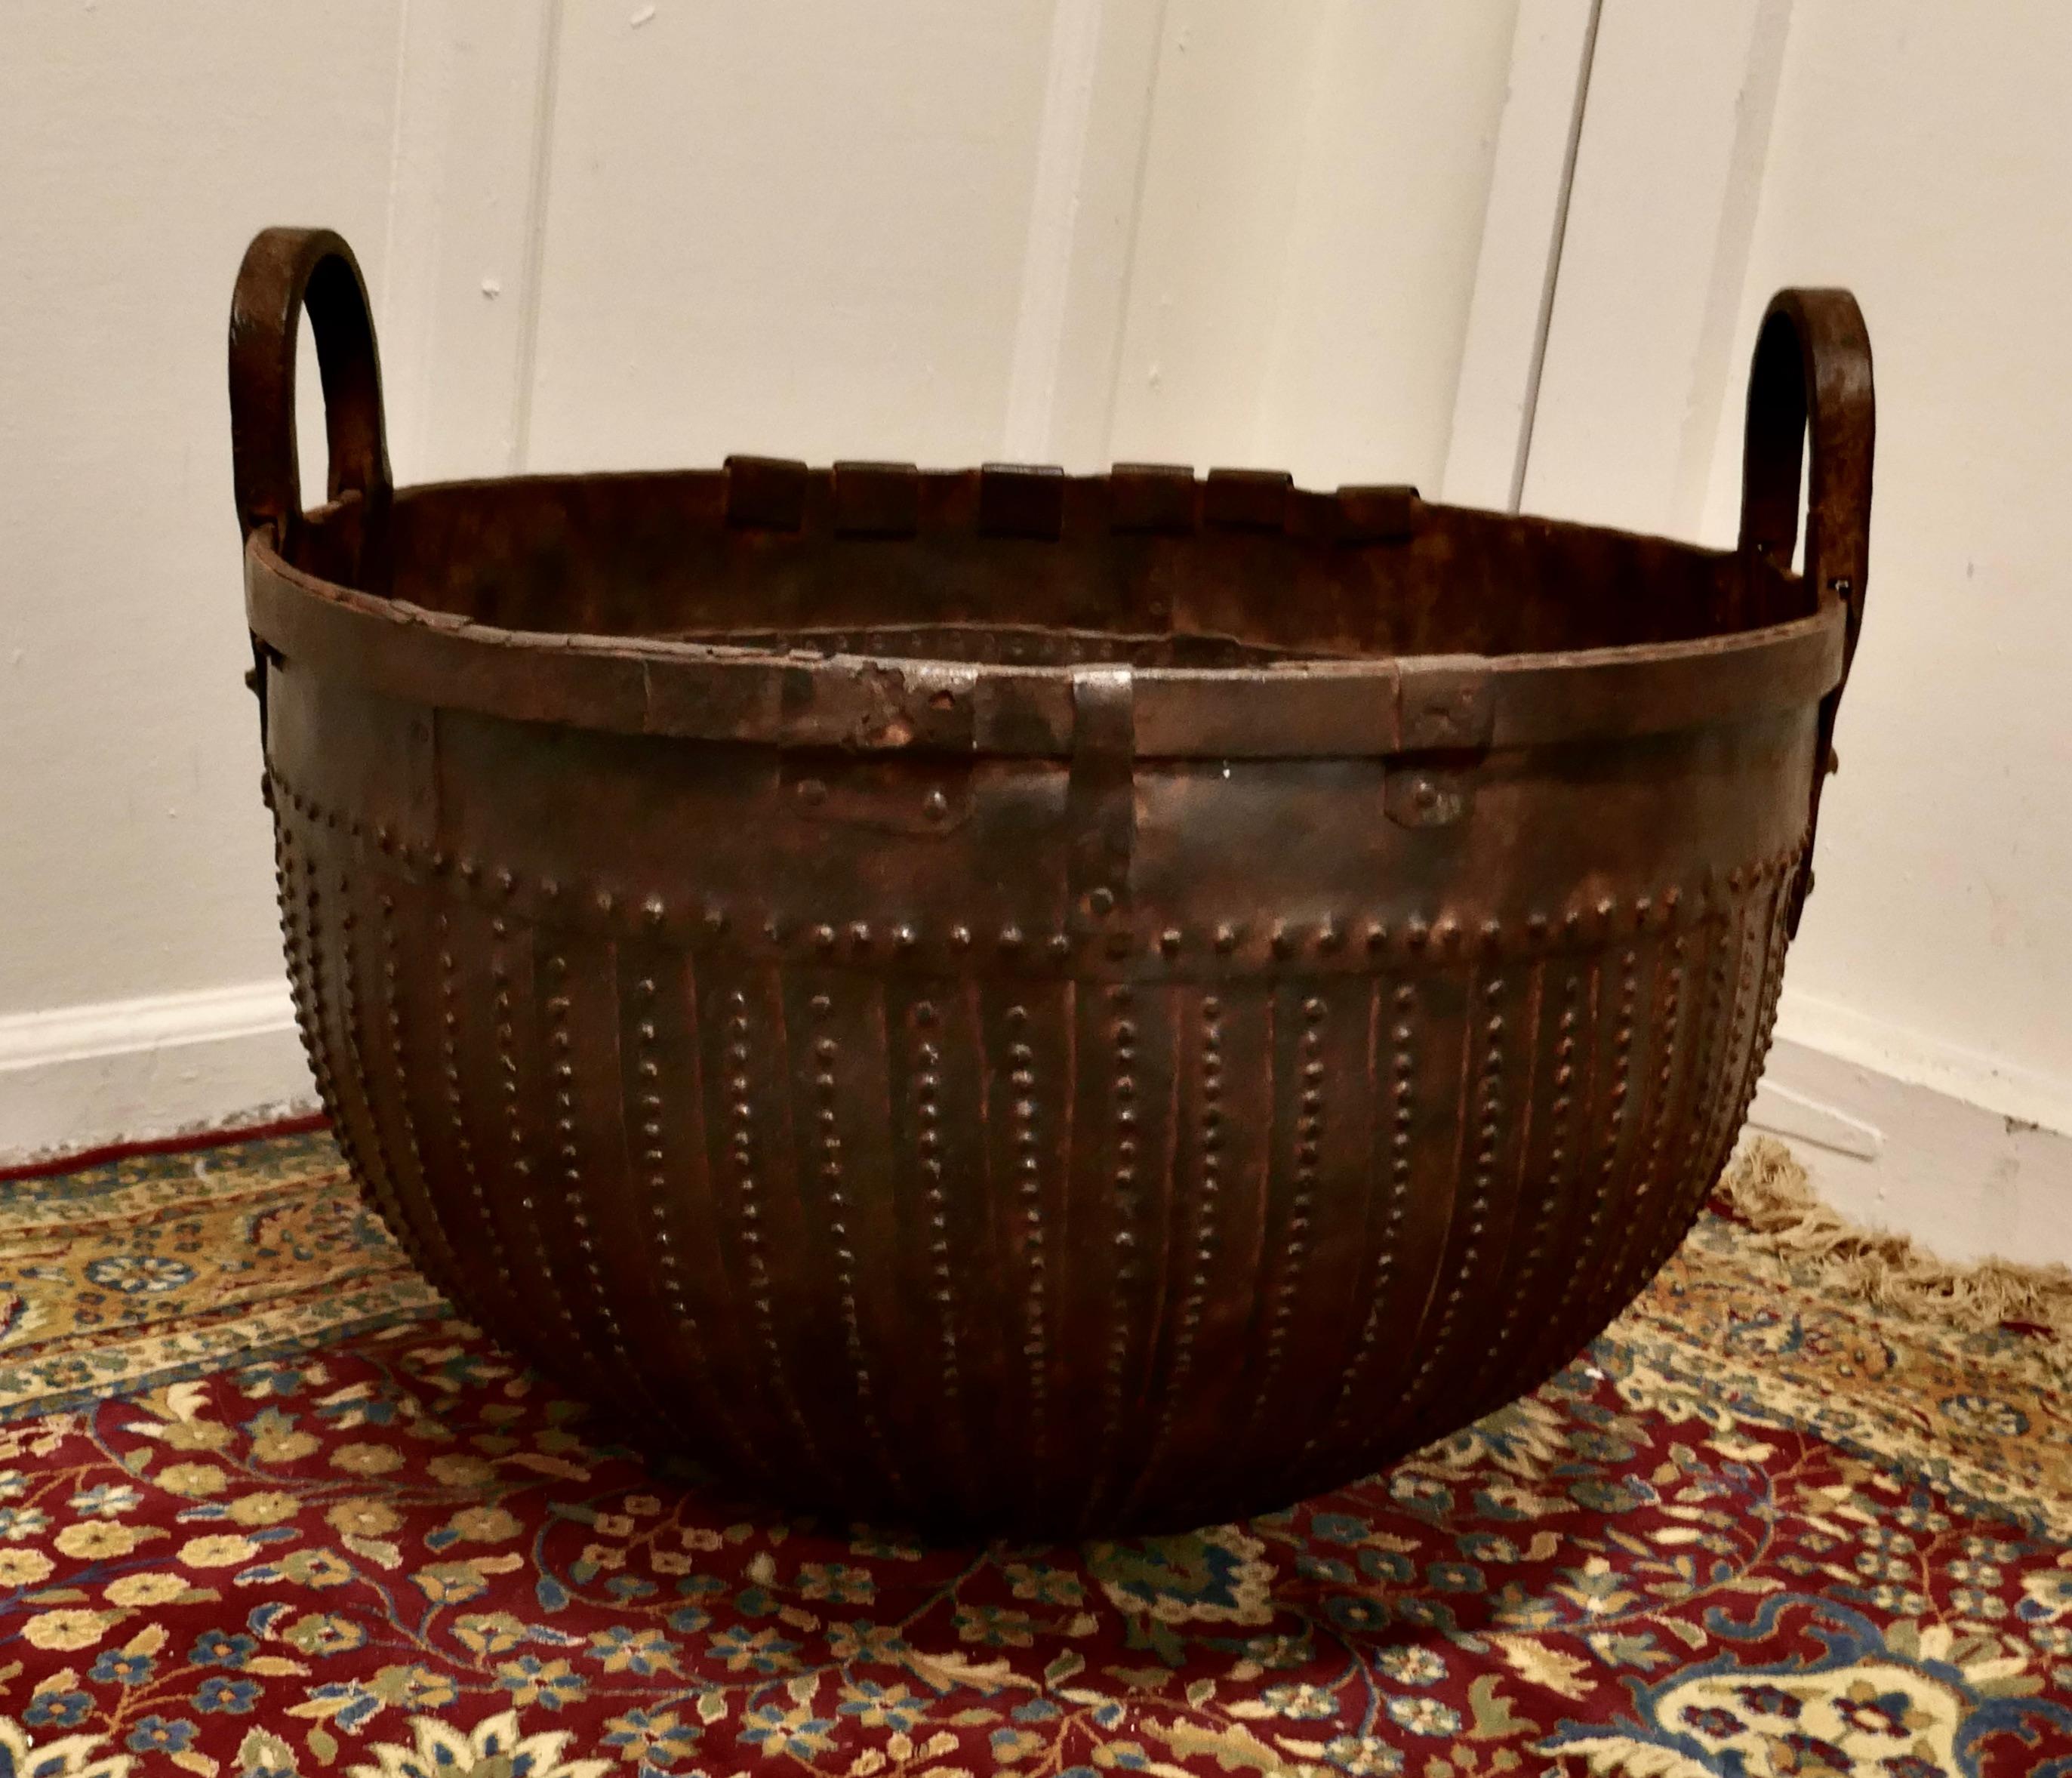 19th Century North African Cooking Pot, Brutalist Log Basket

Stud and Riveted Cooking Pot from North Africa, the vessel is made in hand forged Iron, it has 2 strong carrying handles

An amazing piece, the main body is made up with layered